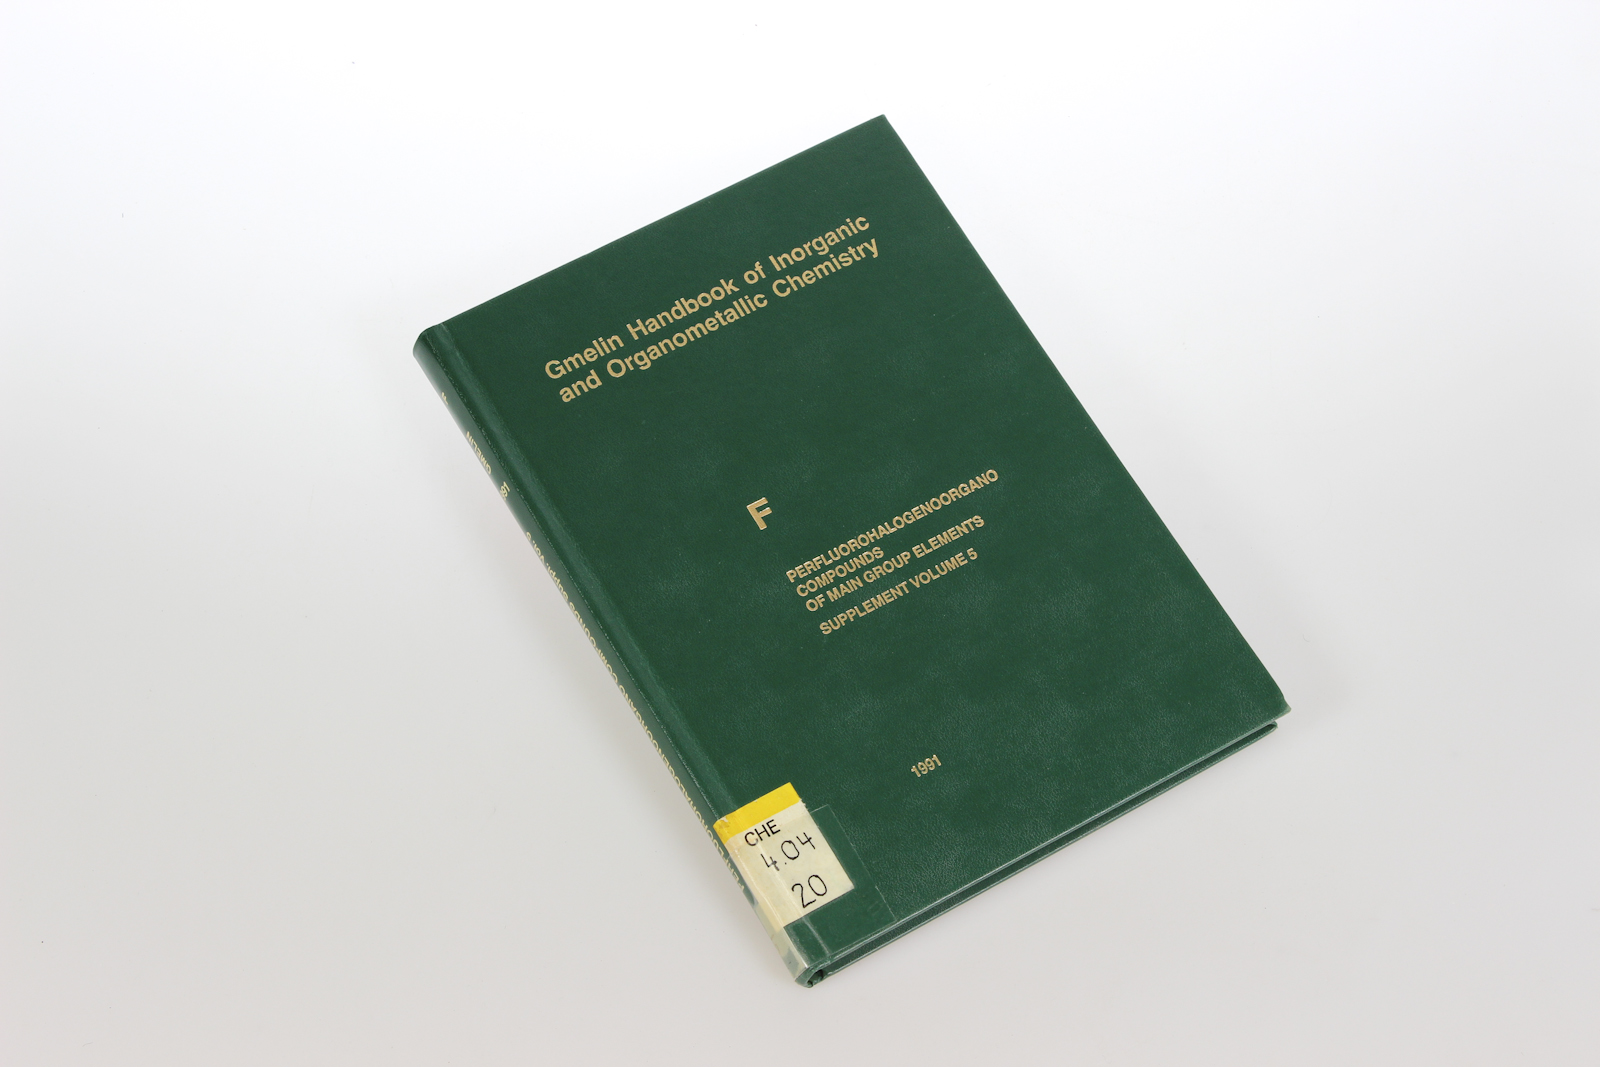 Gmelin-Institut fr Anorg. Chemie der Max-Planck-Gesellschaft zur Frderung d. Wissensch. (Hg):  Gmelin Handbook of Inorganic and Organometallic Chemistry. System Number 5: F Perfluorohalogenoorgano Compounds of Main Group Elements. Supplement Volume 5: Aliphatic and Aromatic Compounds of Nitrogen. 